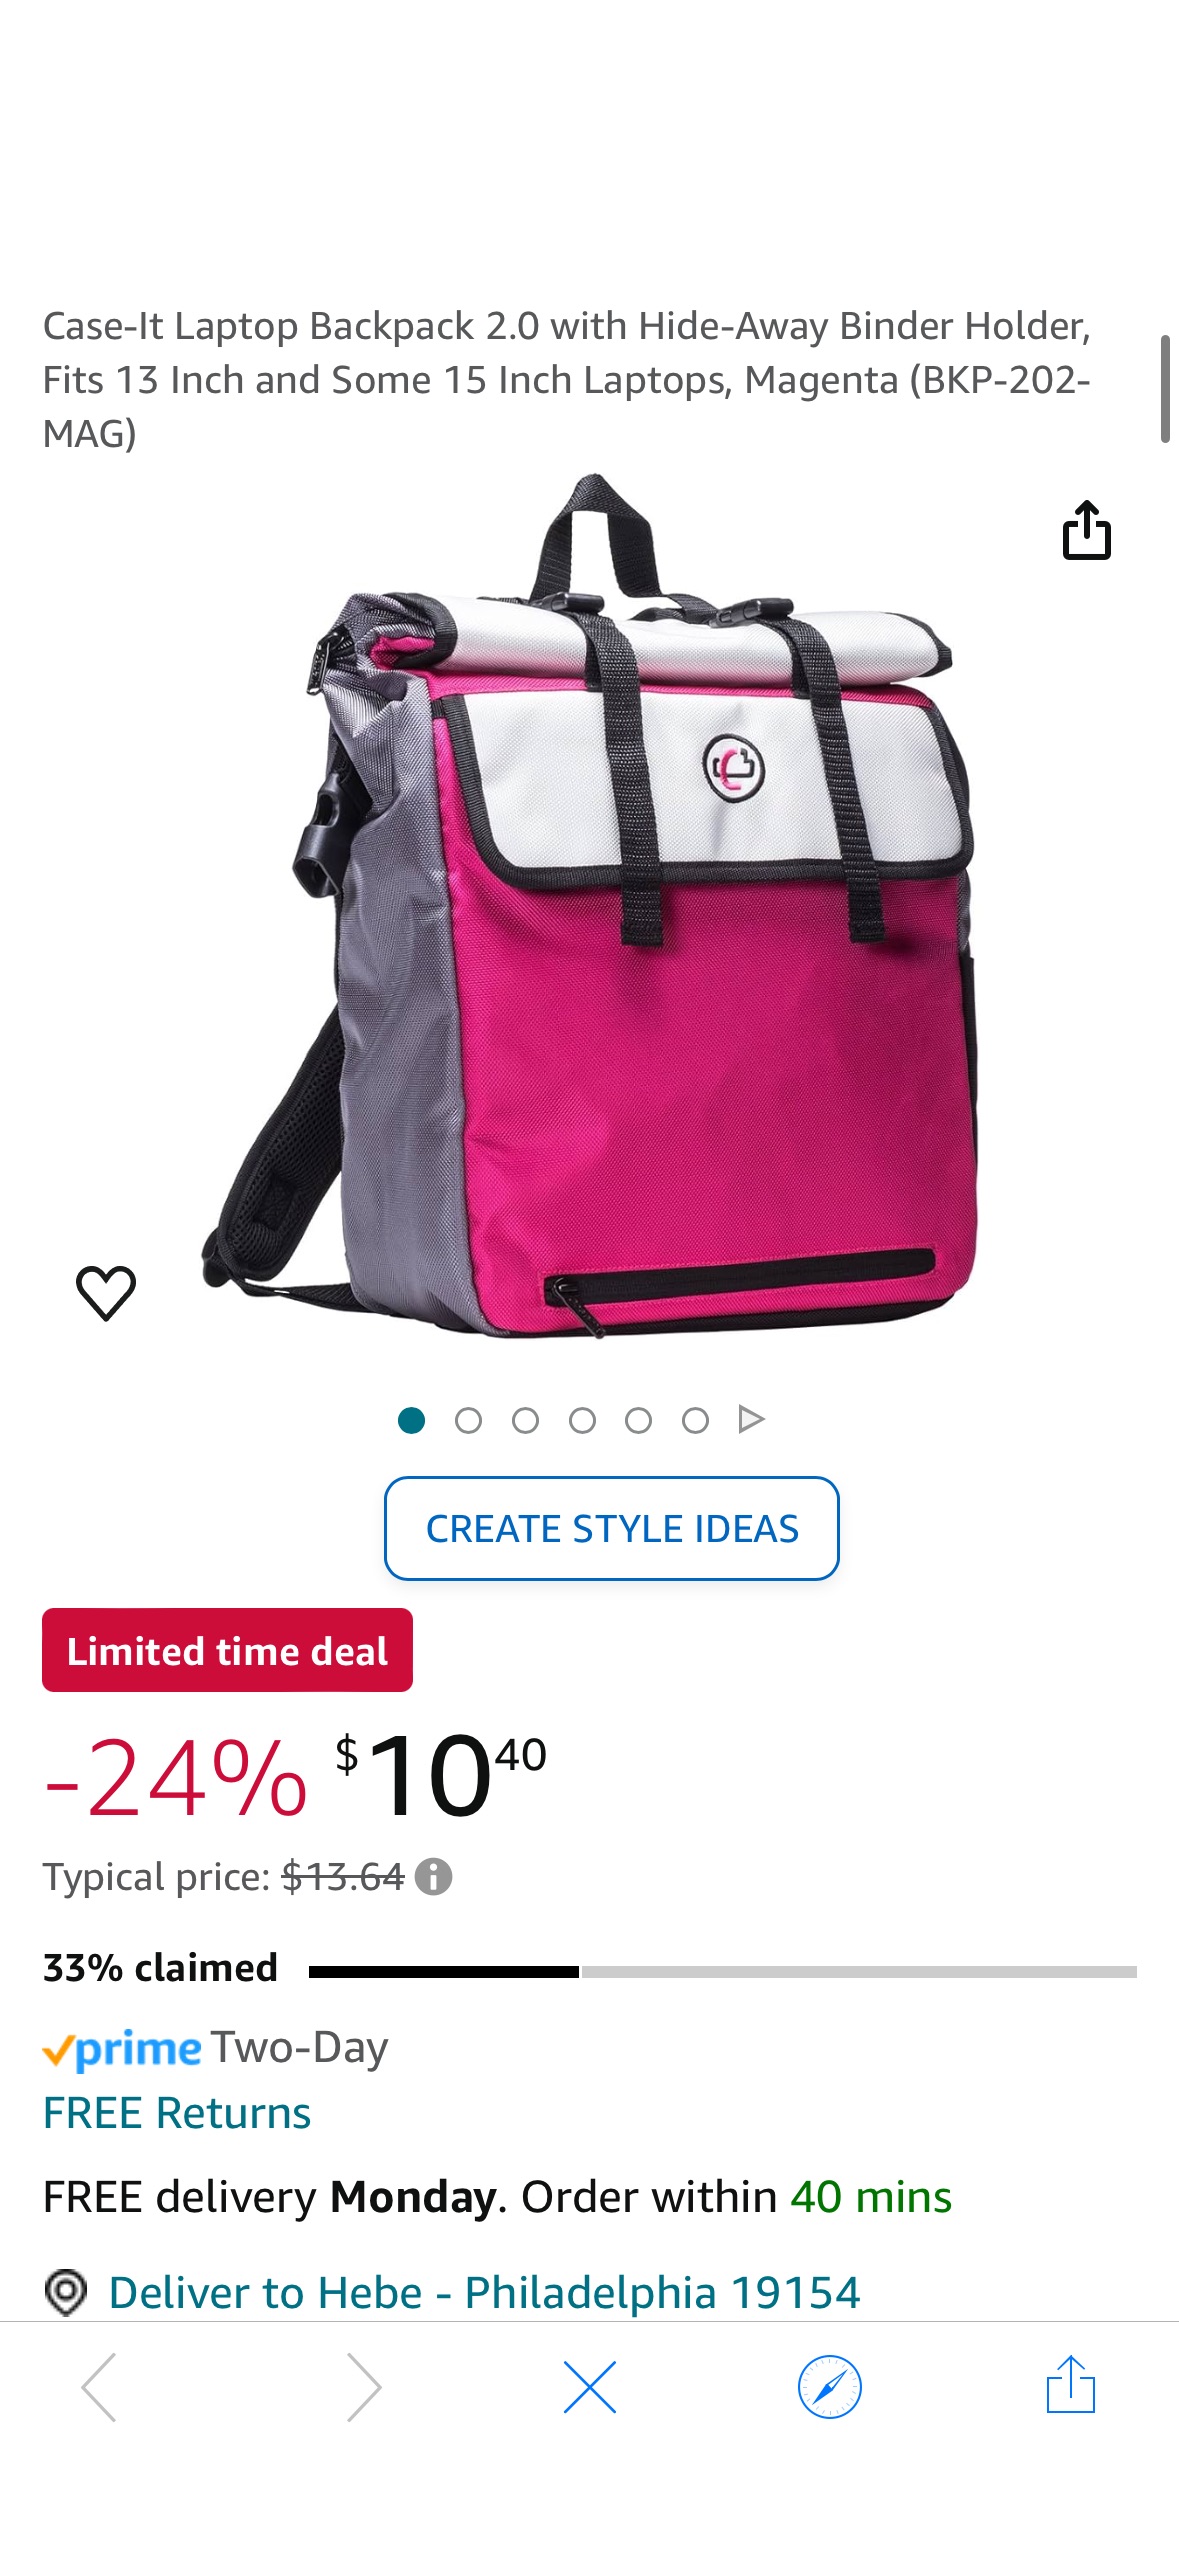 Amazon.com: Case-It Laptop Backpack 2.0 with Hide-Away Binder Holder, Fits 13 Inch and Some 15 Inch Laptops, Magenta (BKP-202-MAG) : Electronics